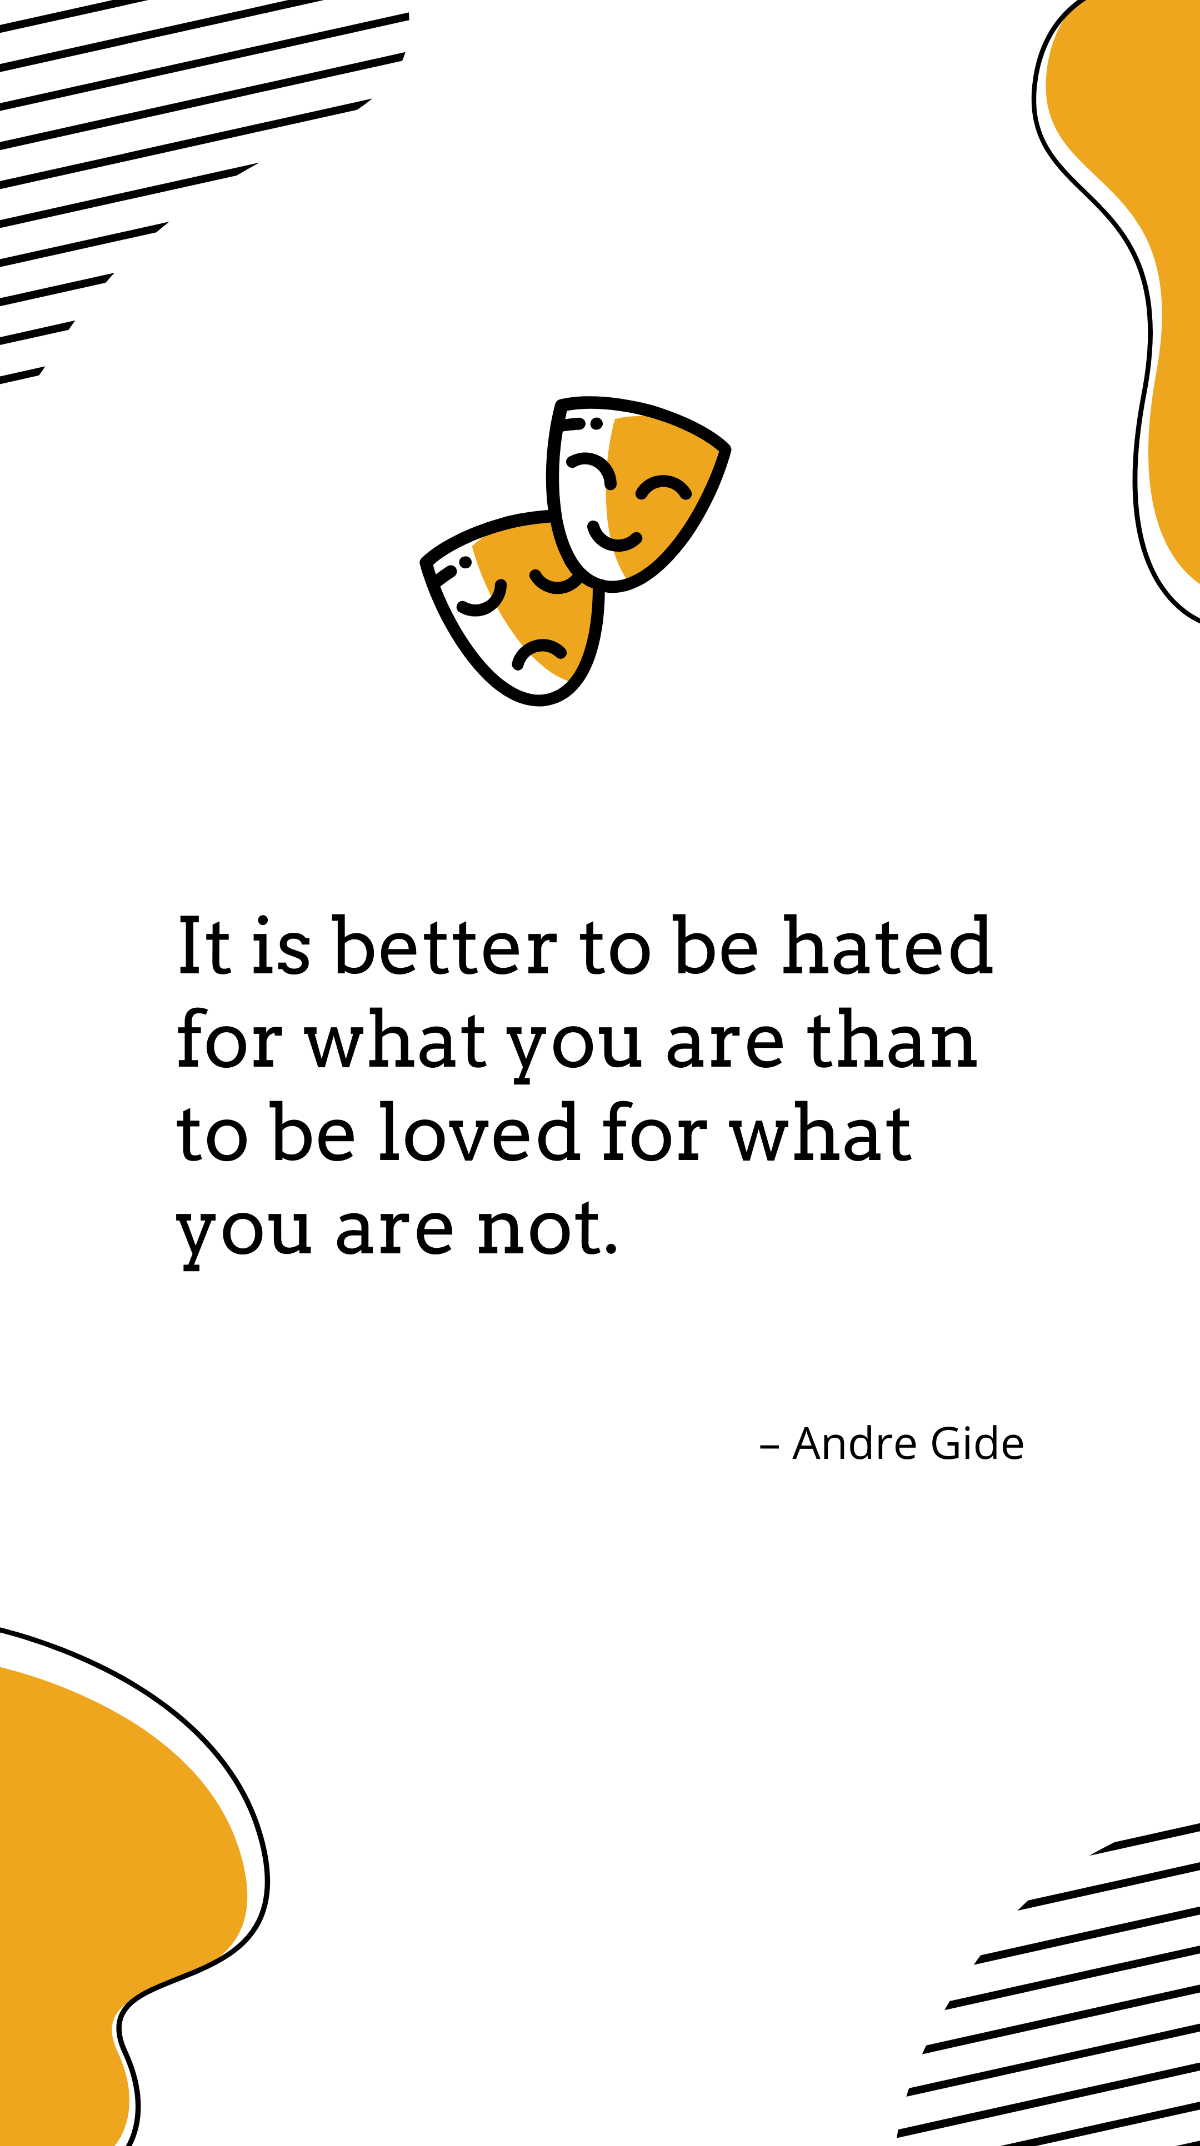 Andre Gide - “It is better to be hated for what you are than to be loved for what you are not.” Template